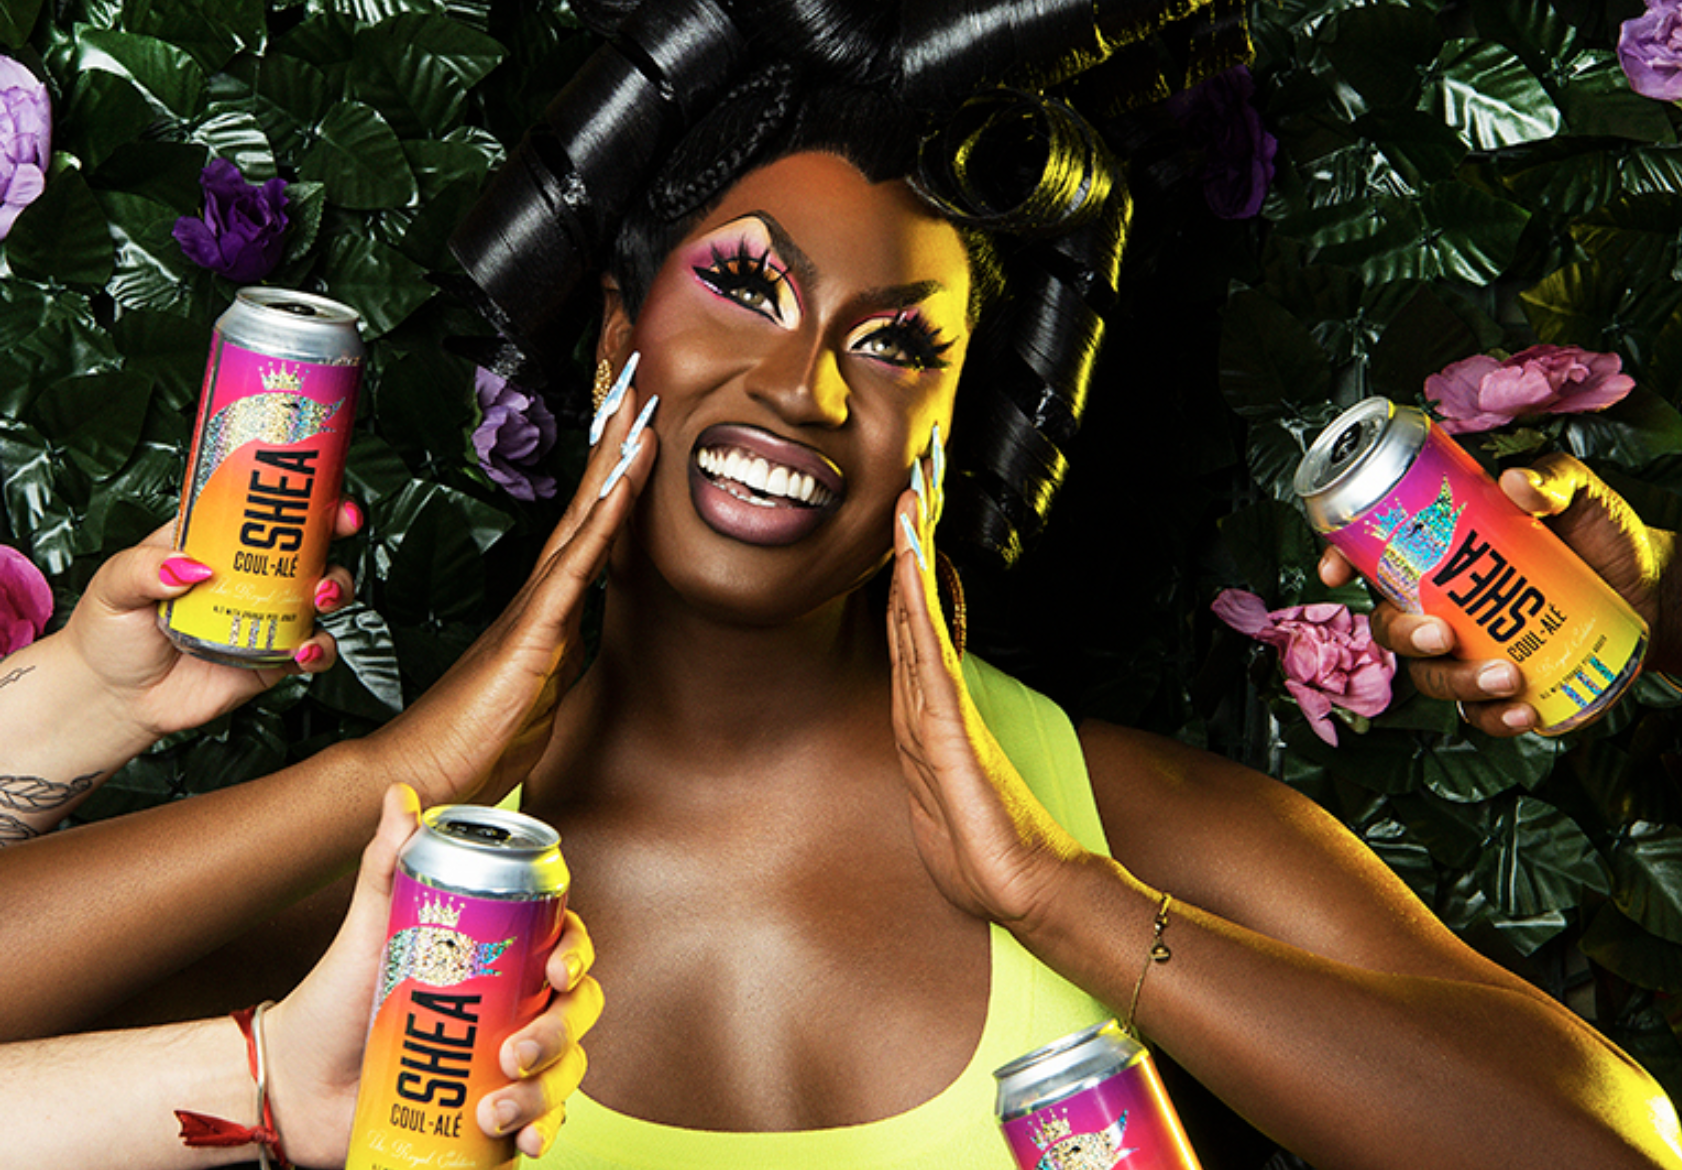 Drag queen Shea Couleé poses with beer cans 